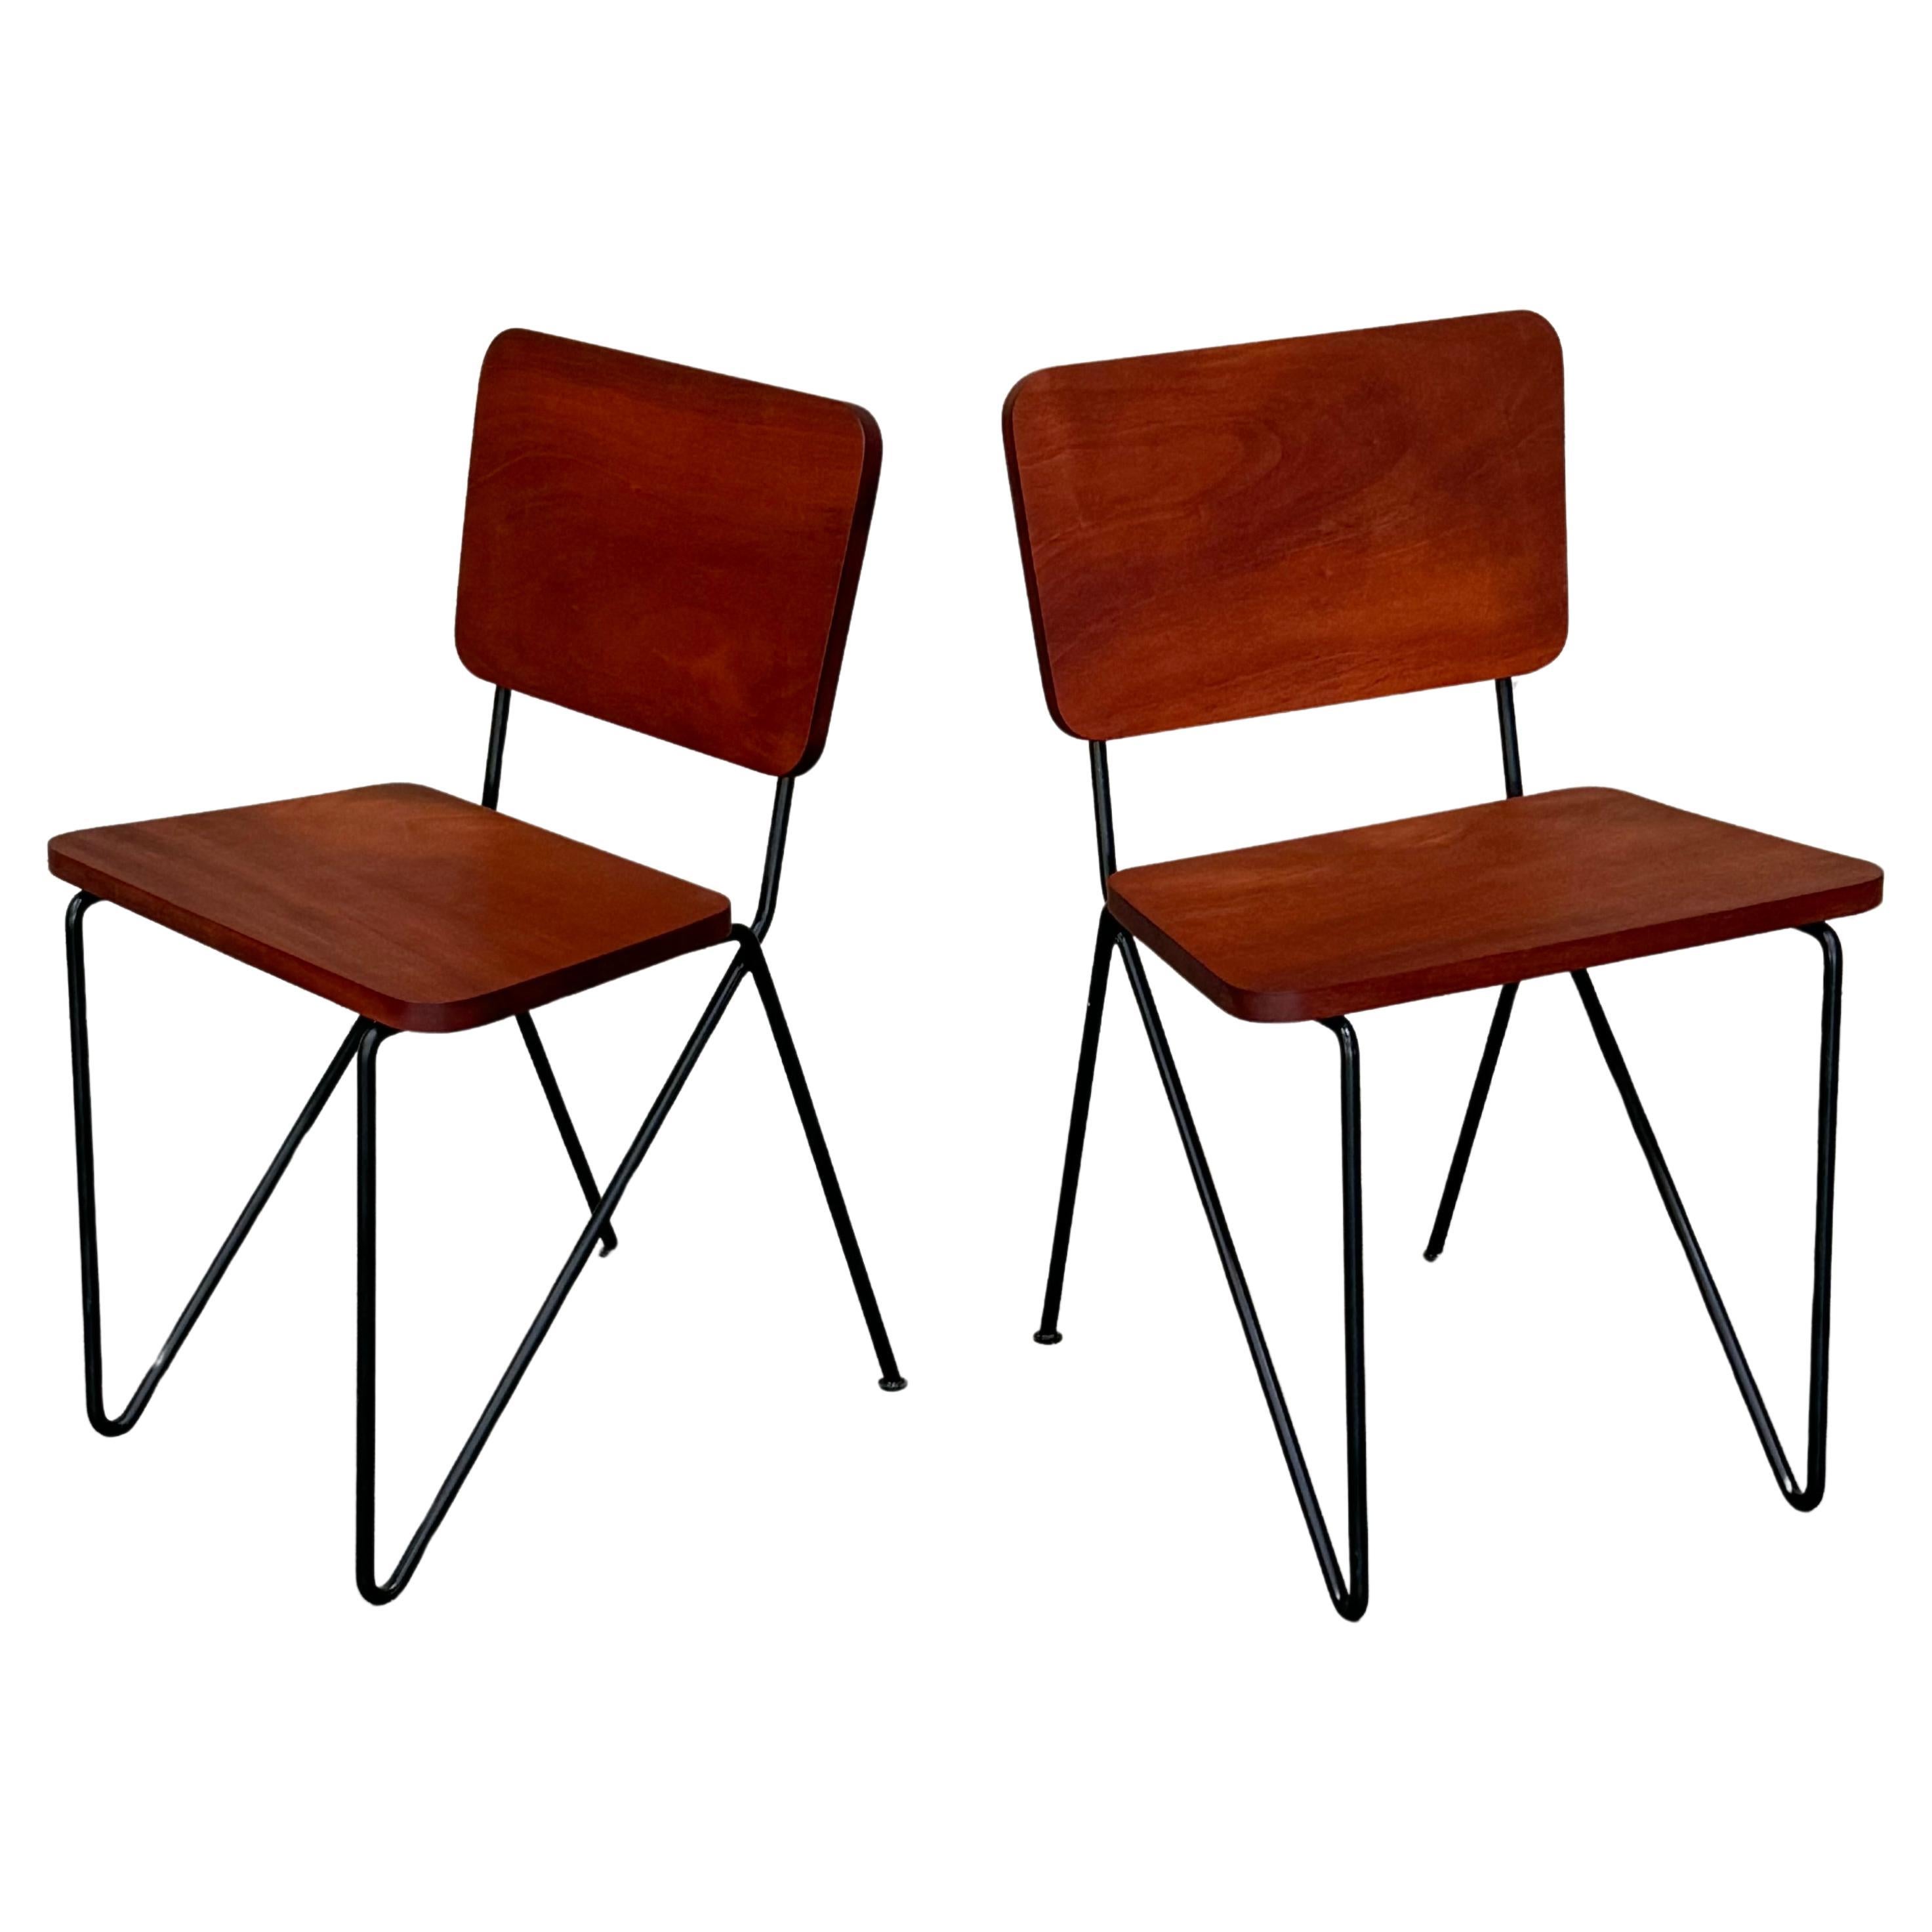 Pair of 1950s California Design Iron and Tropical Hardwood Side Chairs For Sale